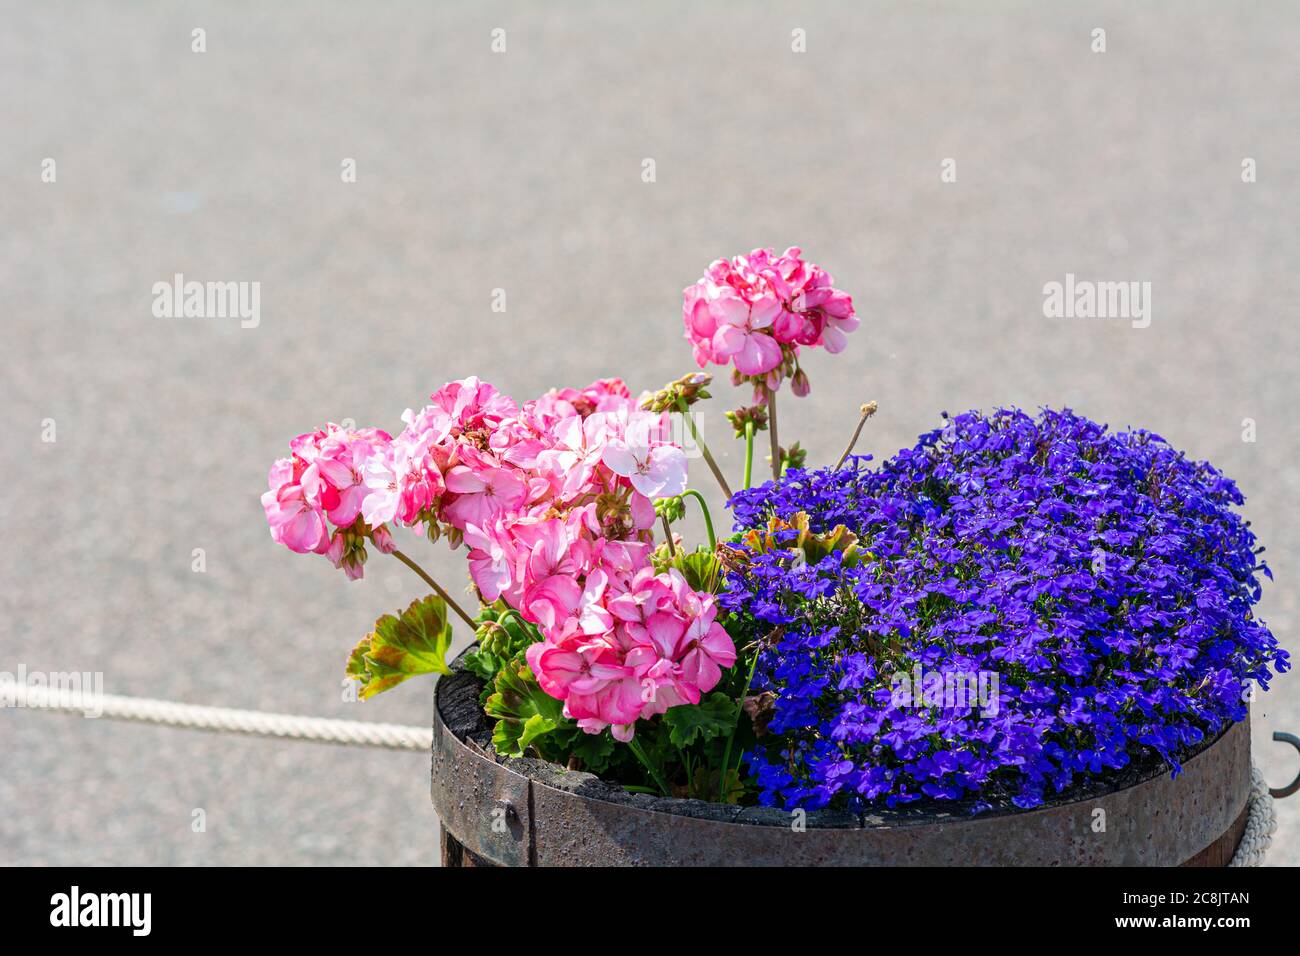 Flowerpot with blue and pink flowers. All gray background. Stock Photo